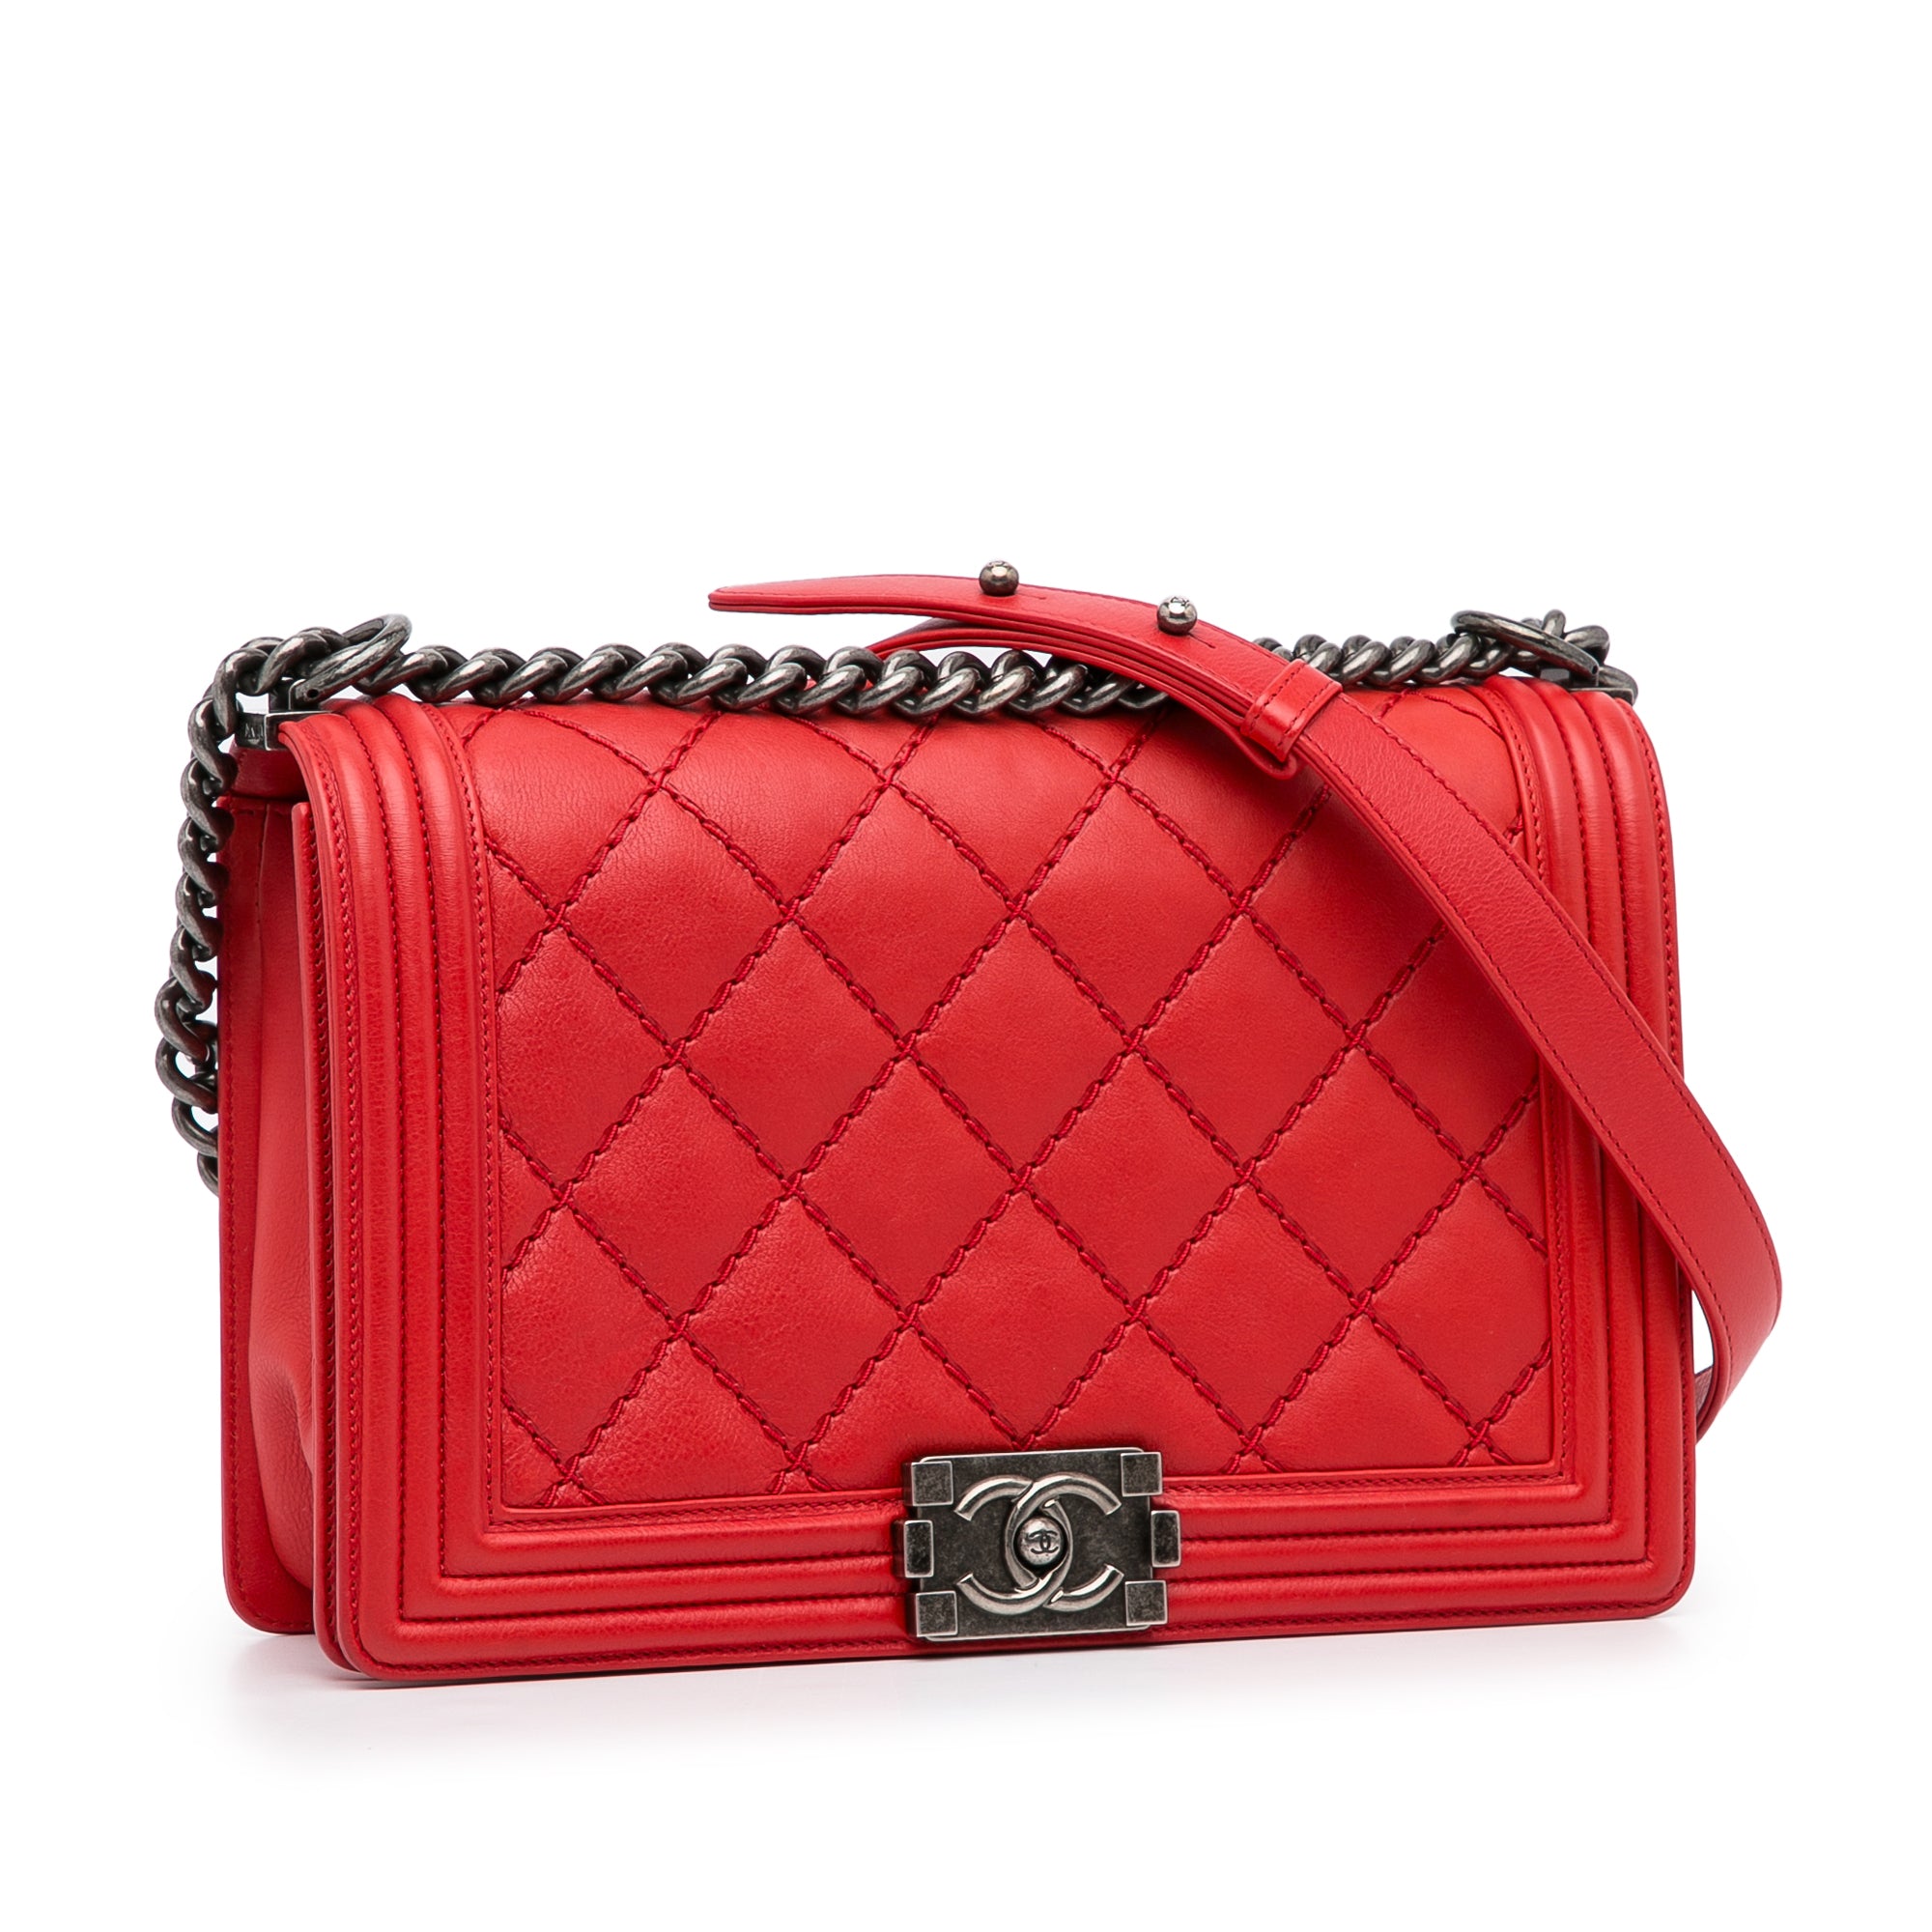 Red Chanel Small Lambskin Double Stitch Boy Flap Shoulder Bag, Cra-wallonieShops Revival